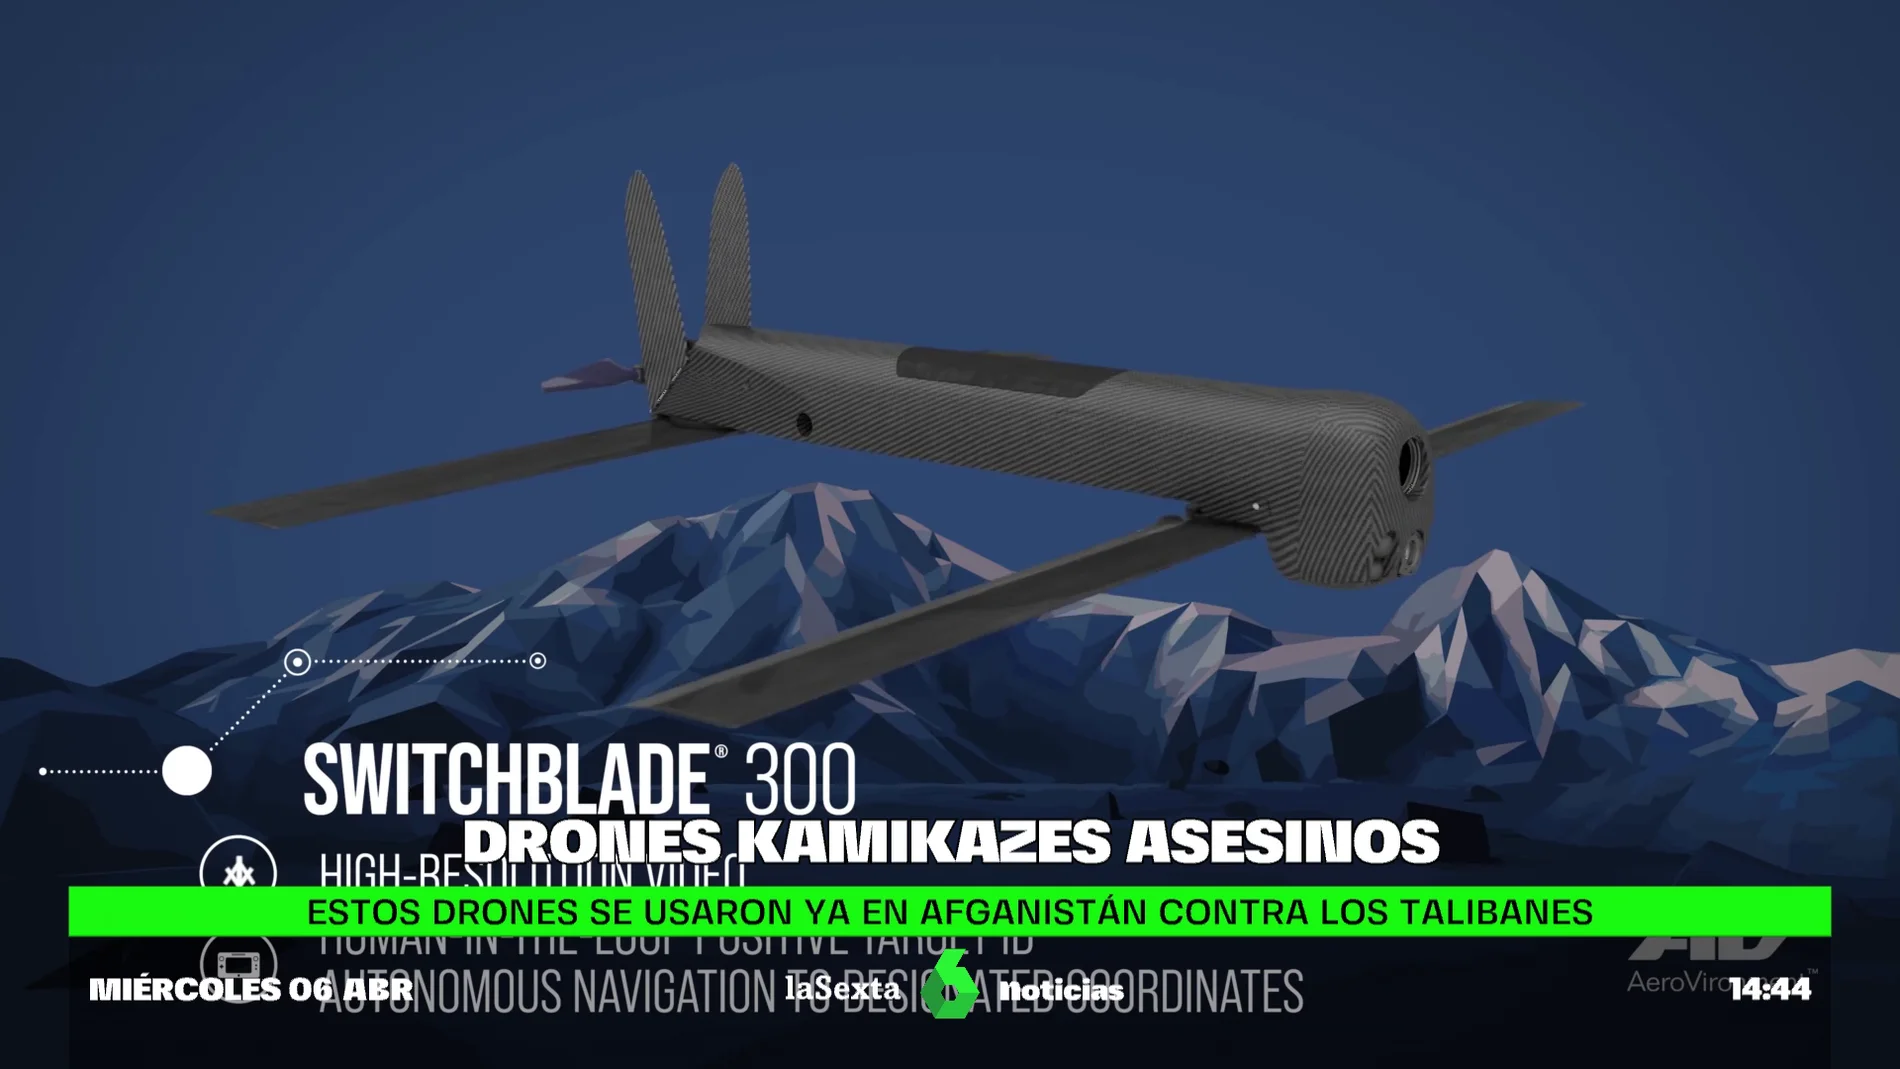 drones asesinos